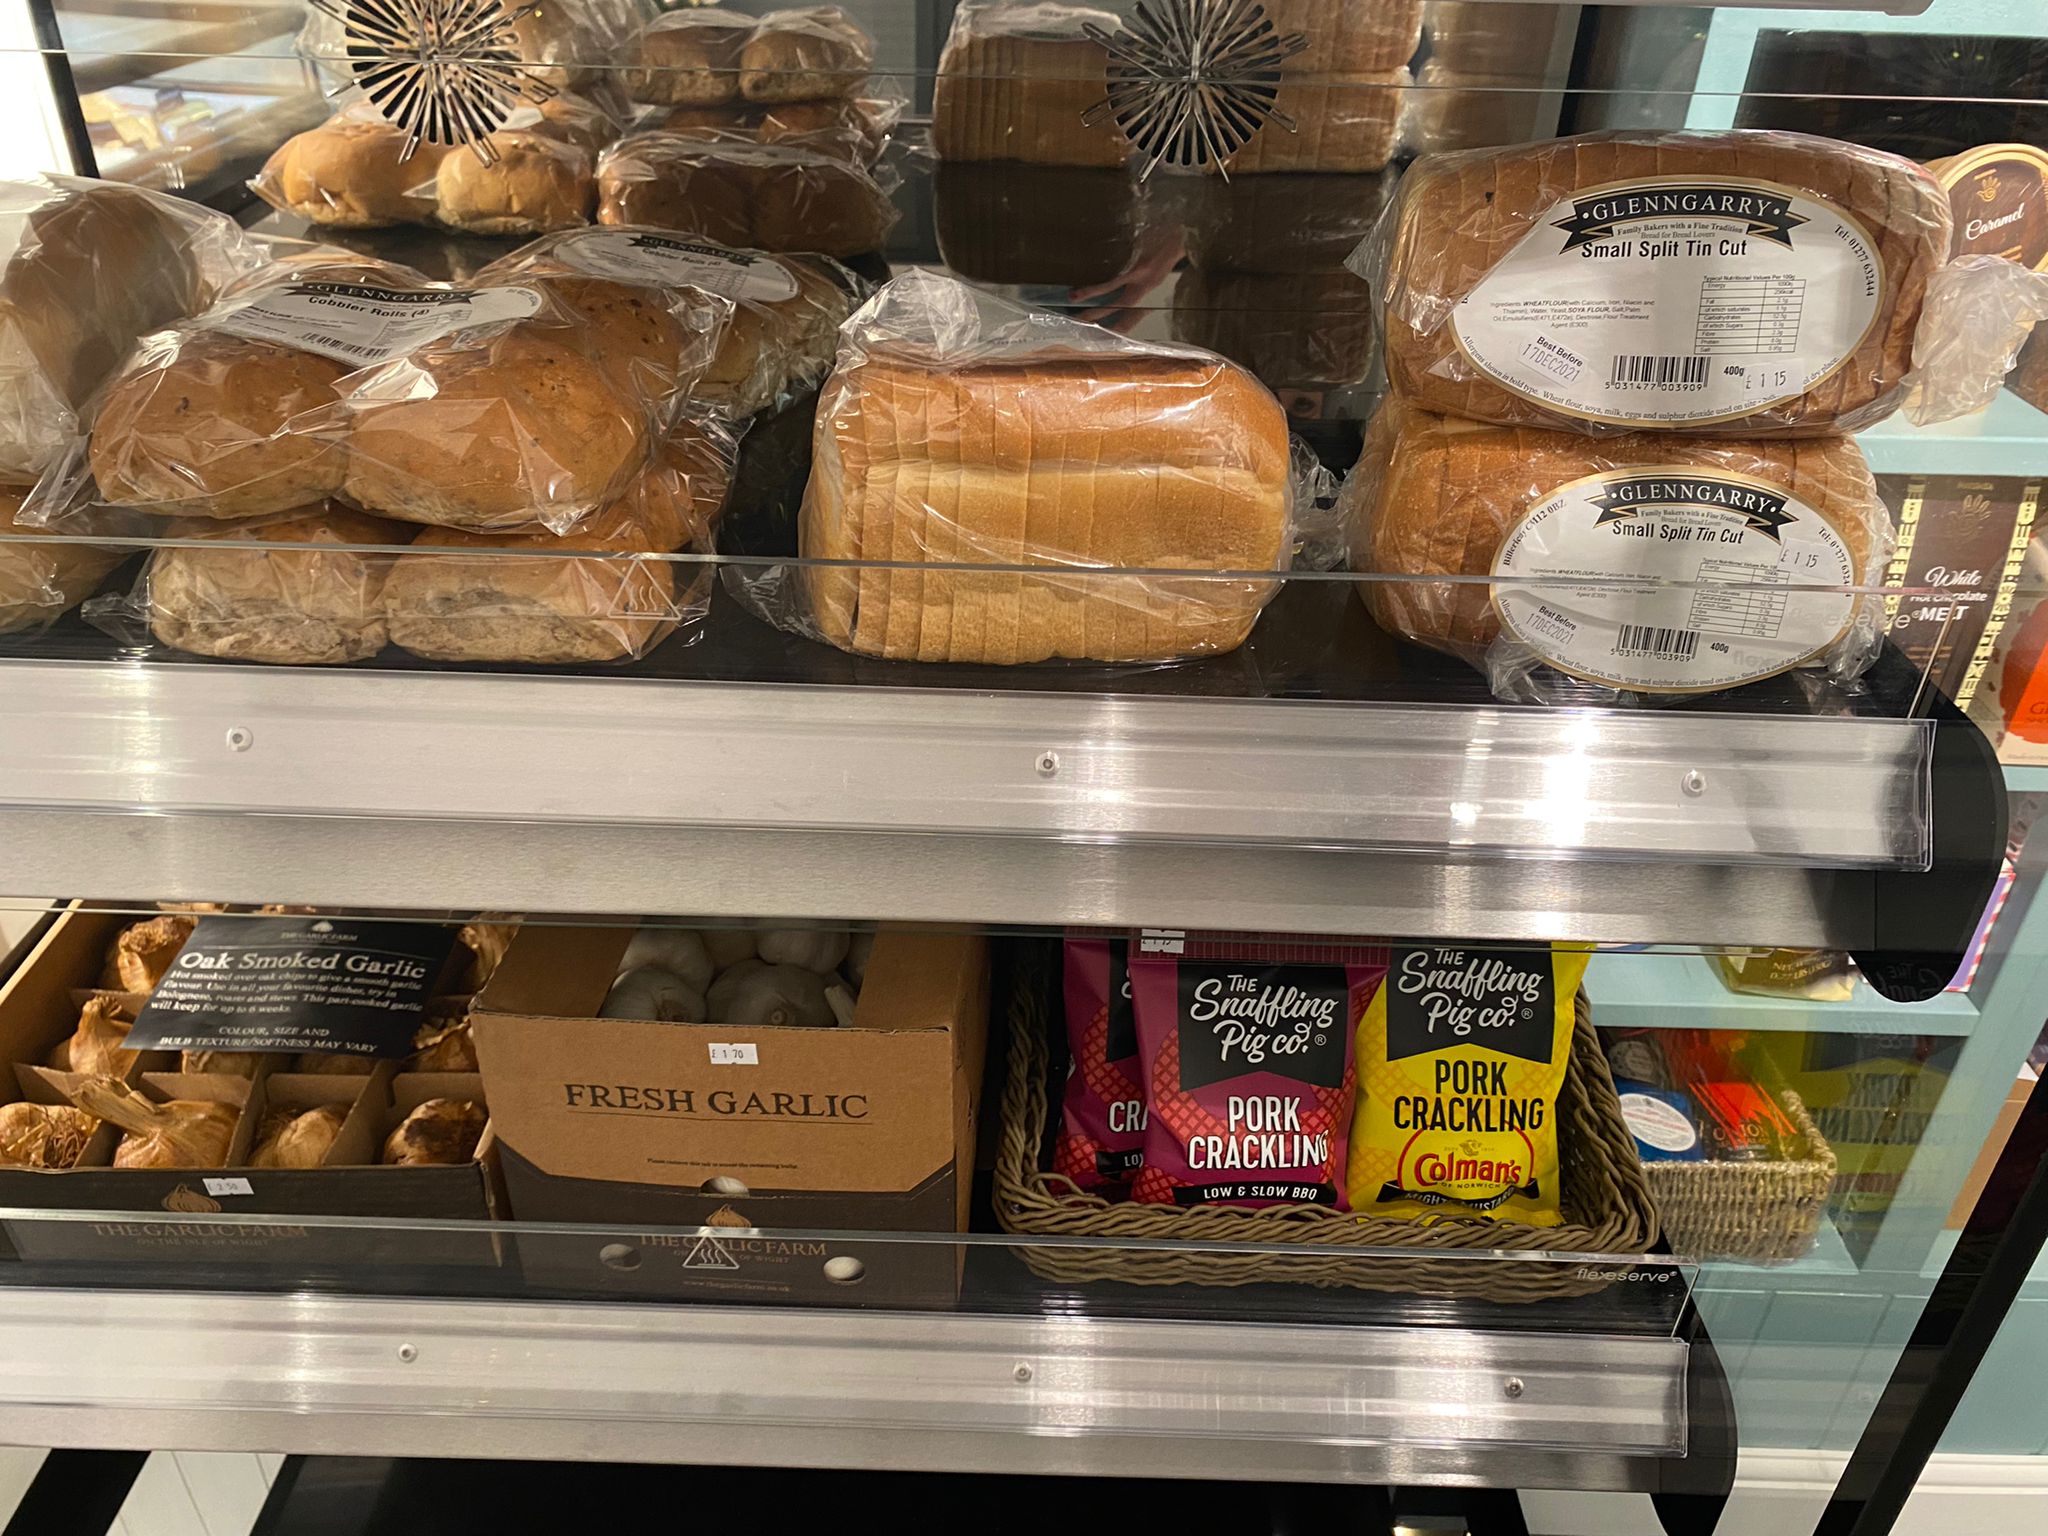 A great range of products available from Millin's Deli